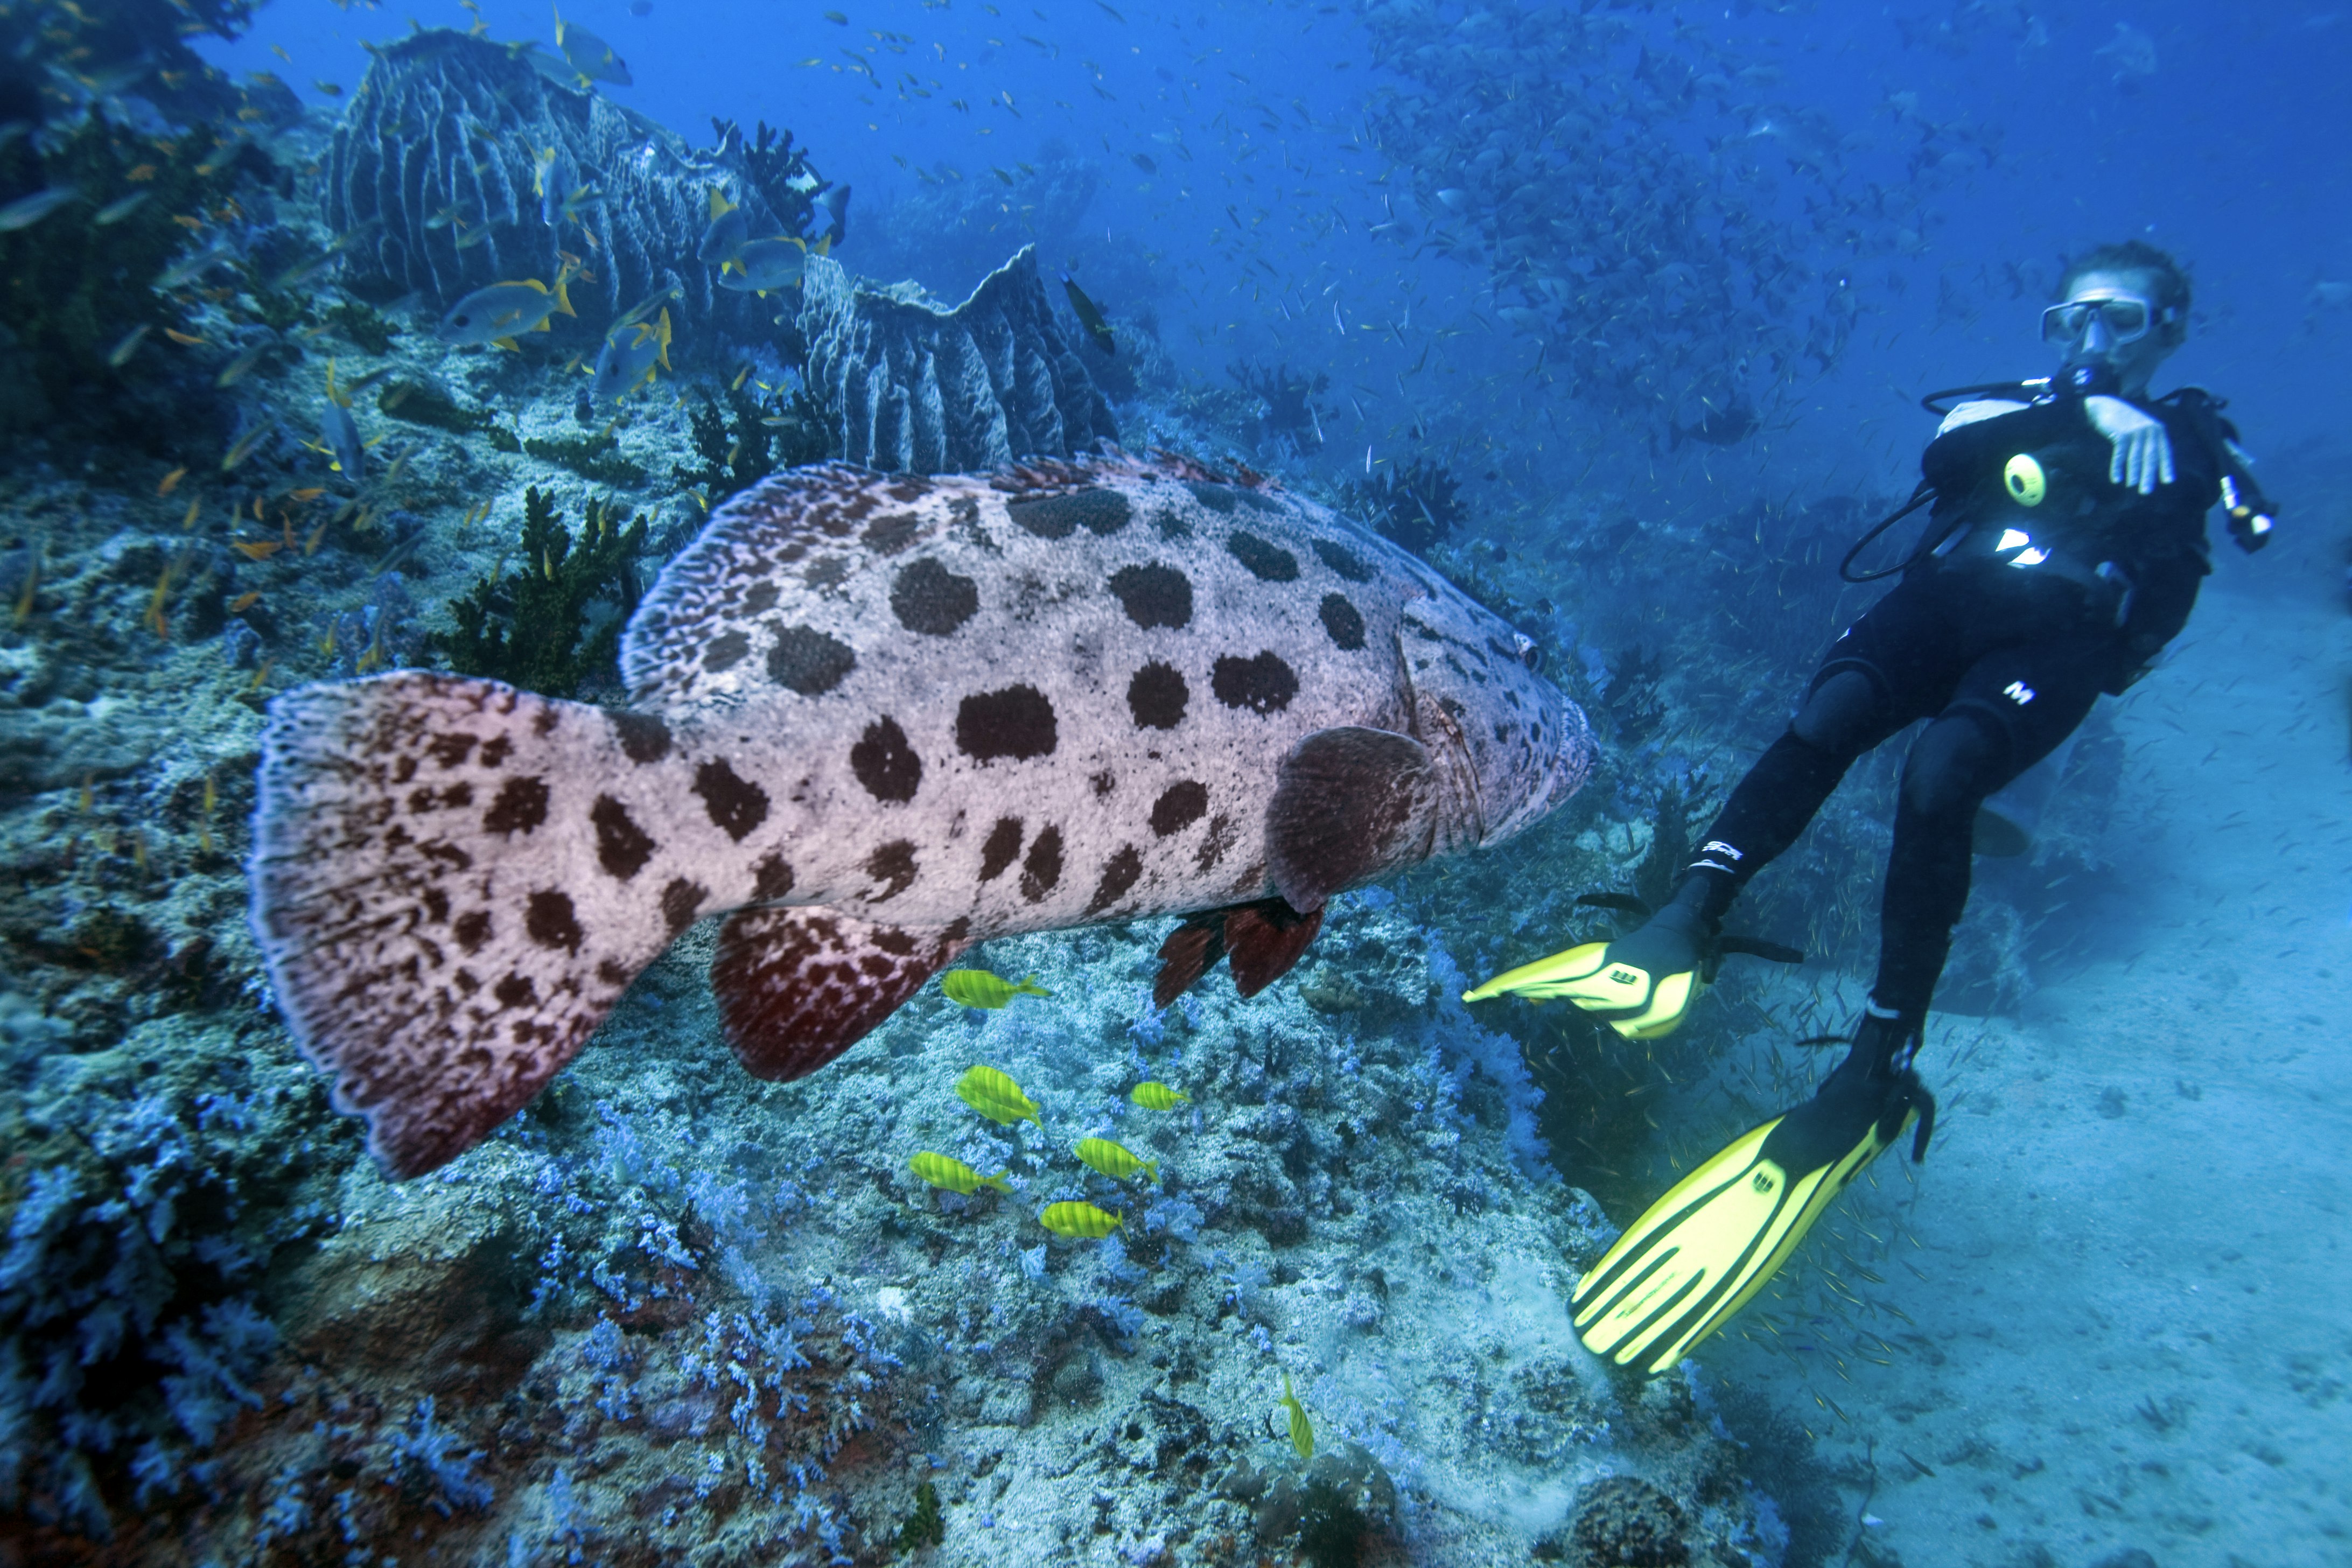 A huge, admittedly slightly terrifying, spotted fish swims towards a diver off the coast of Havelock Island. In the background a reef is visible with smaller fish swimming around it.